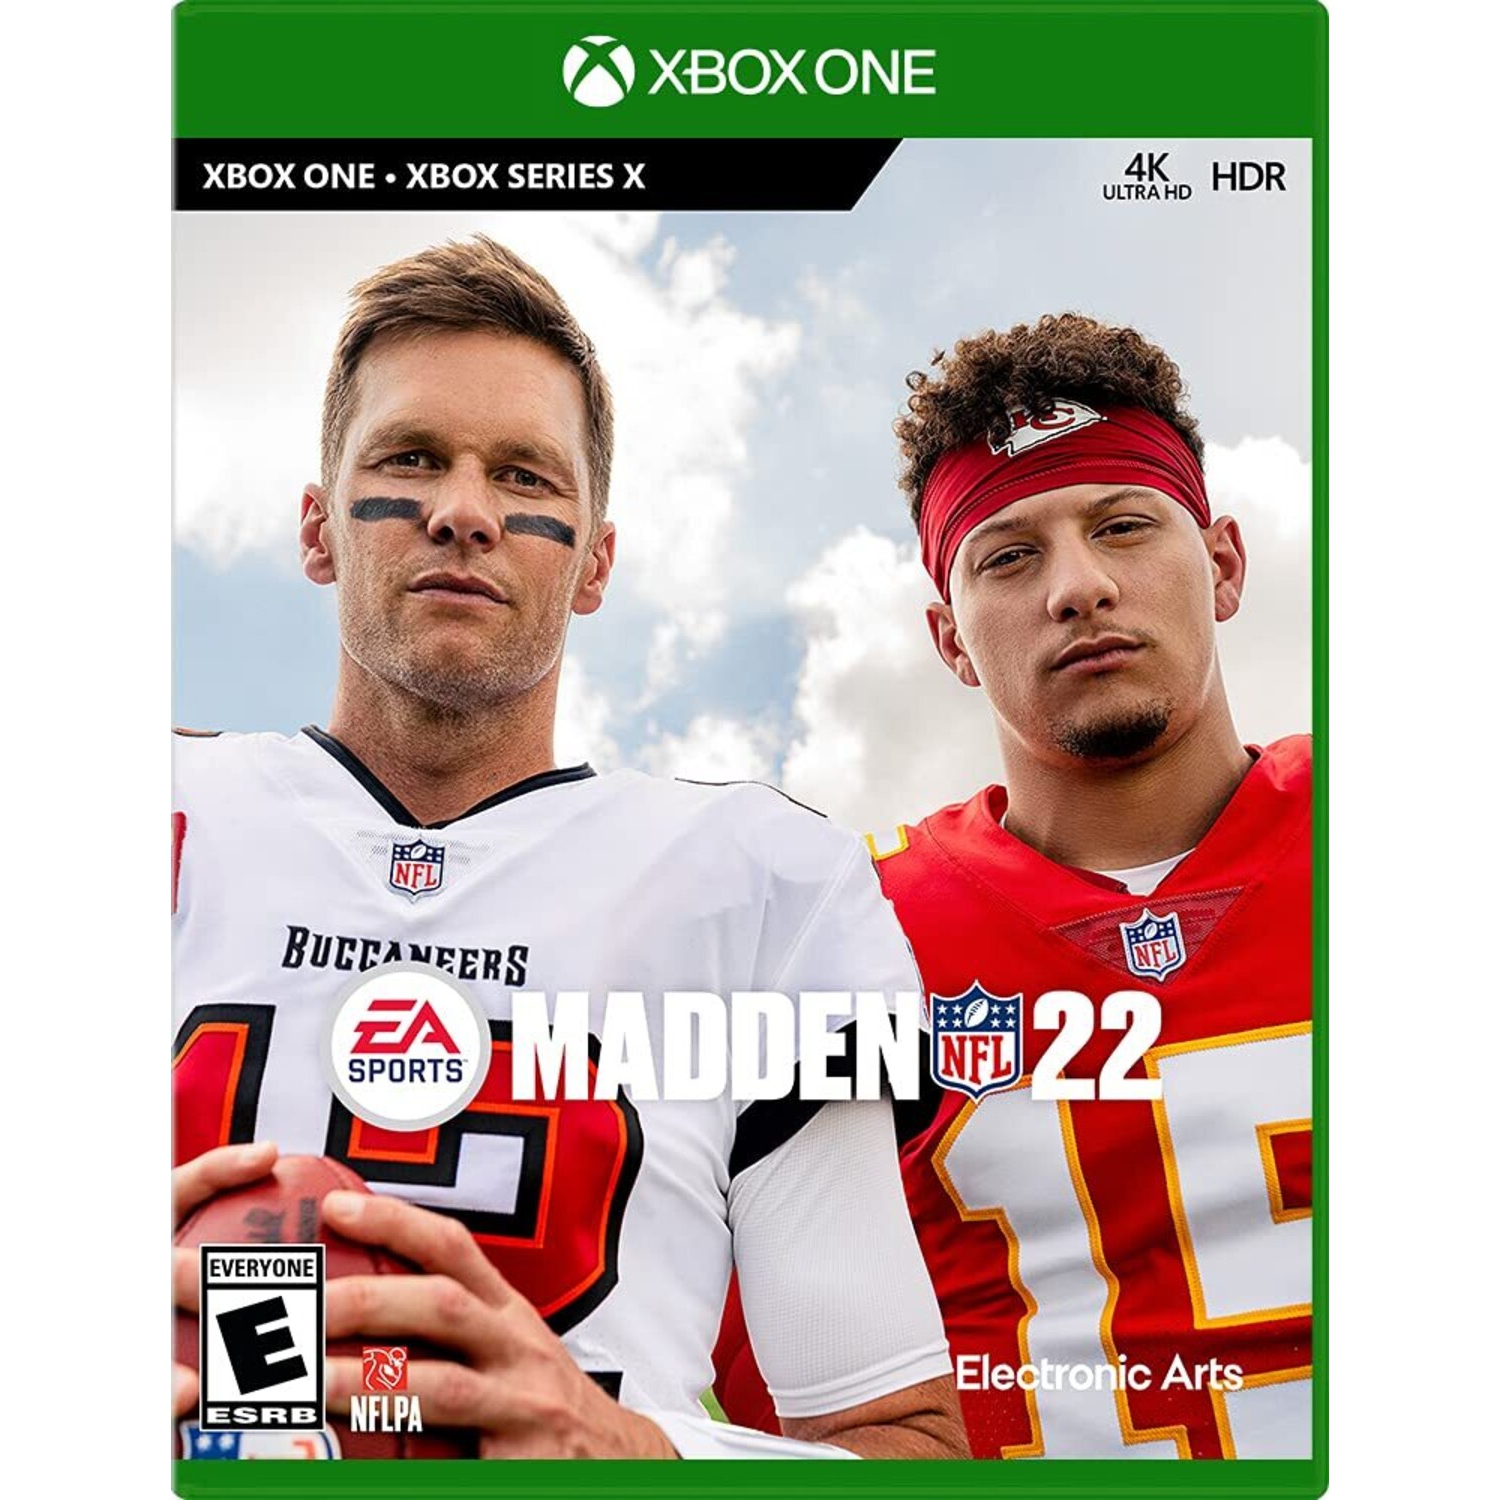 Madden NFL 22 for Xbox One and Xbox Series X [VIDEOGAMES]